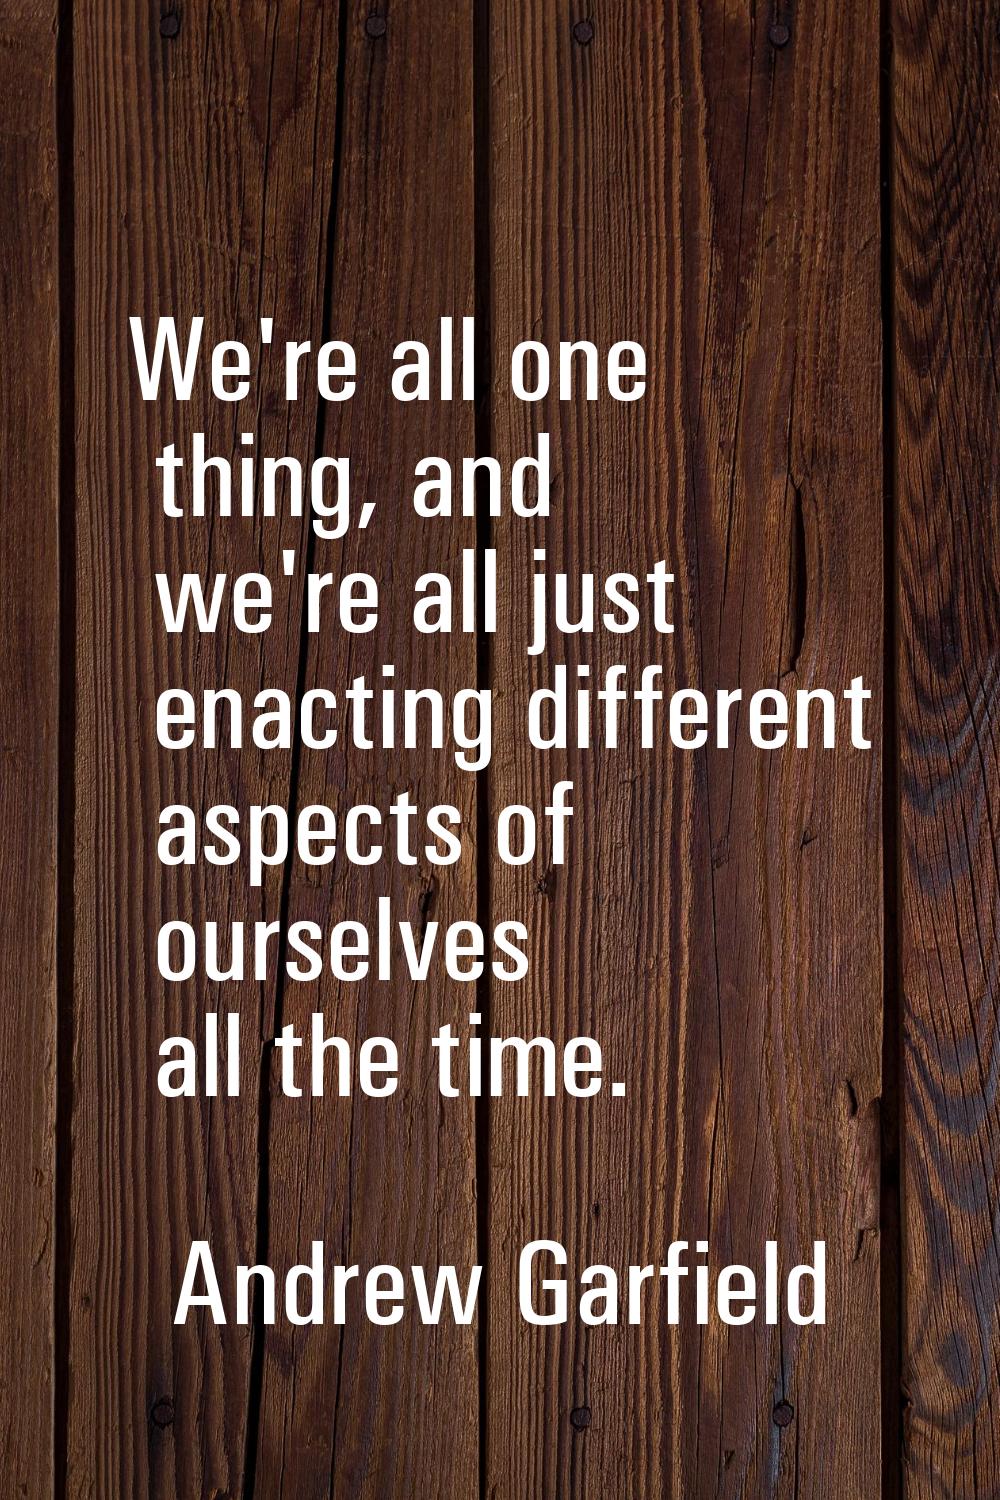 We're all one thing, and we're all just enacting different aspects of ourselves all the time.